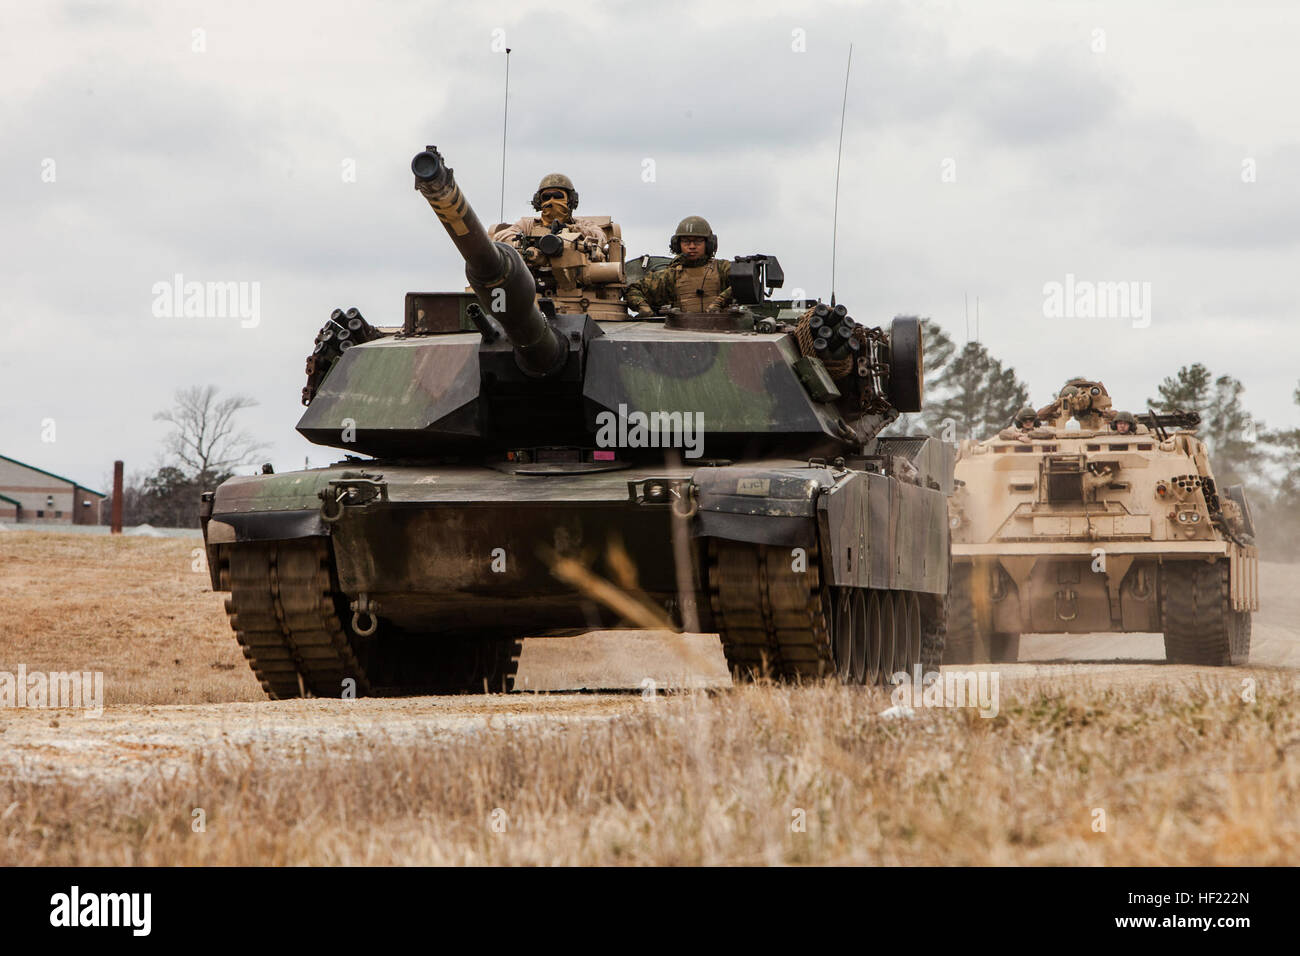 U.S. Marine Corps Cpl. Matthew Moores, left, a tank commander, and Lance Cpl. Luis Rosas, loader, 2nd Tank Battalion, 2nd Marine Division, head to the tank ramp on an M1A1 Abrams tank followed by an M88 A2 Hercules Recovery Vehicle, during a Deployment for Training (DFT) Exercise at Fort Pickett, Va., March 28, 2014. The DFT is conducted to strengthen the unit's proficiency in a combat environment.  (U.S. Marine Corps photo by Lance Cpl. Kelly Timney, 2nd MarDiv, Combat Camera/Released) 2nd Tank Battalion Deployment for Training Exercise (DFT) 140328-M-OU200-323 Stock Photo